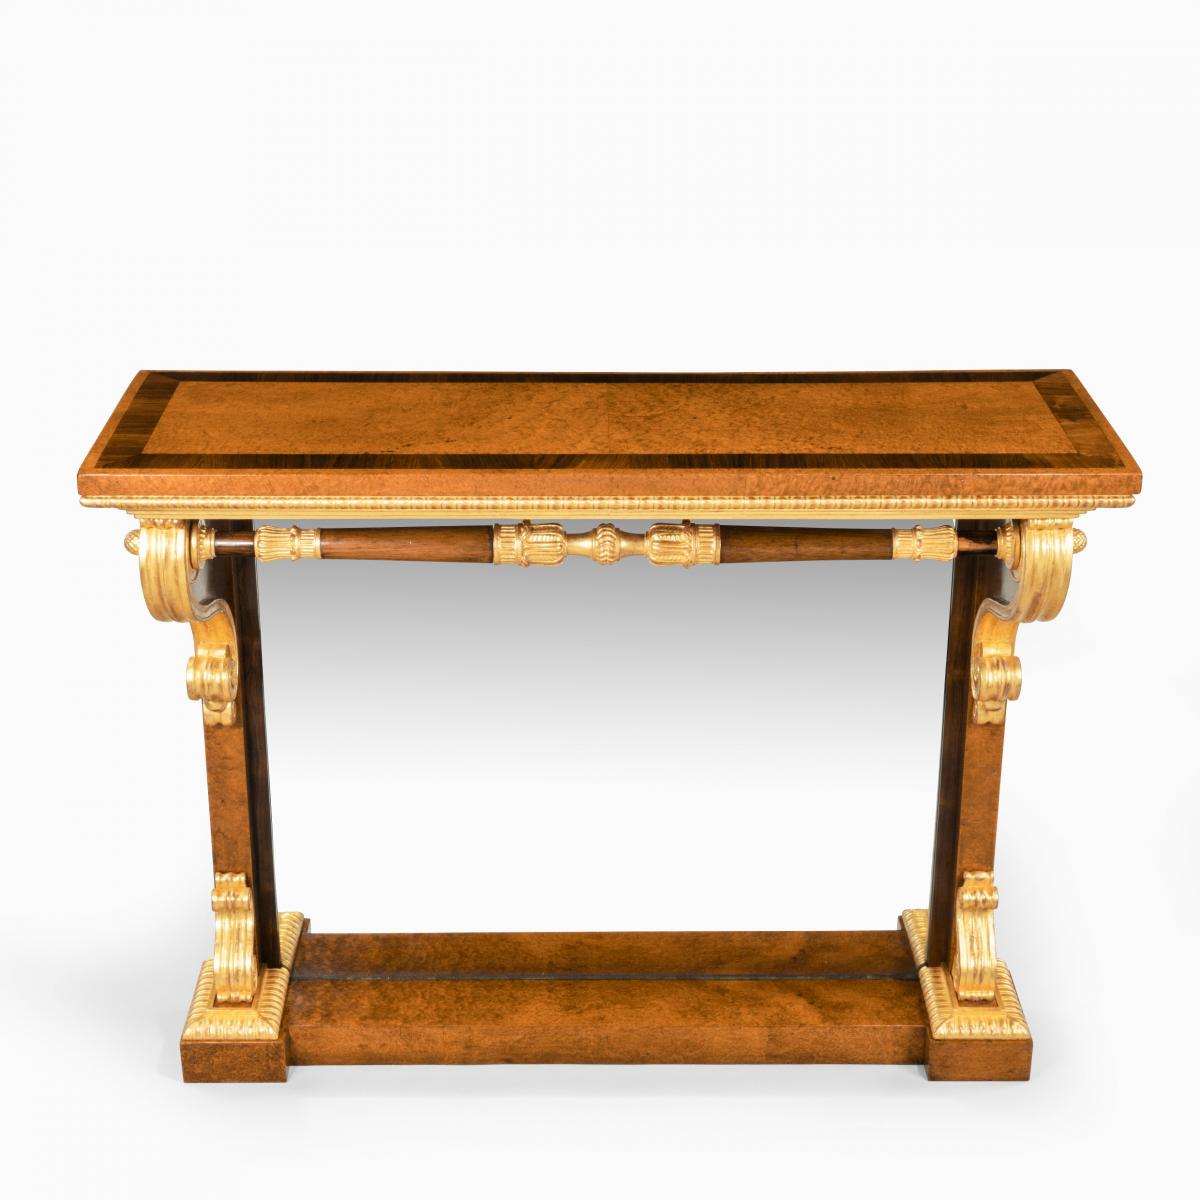 A striking George IV amboyna, rosewood and gilt console table attributed to Morel and Seddon